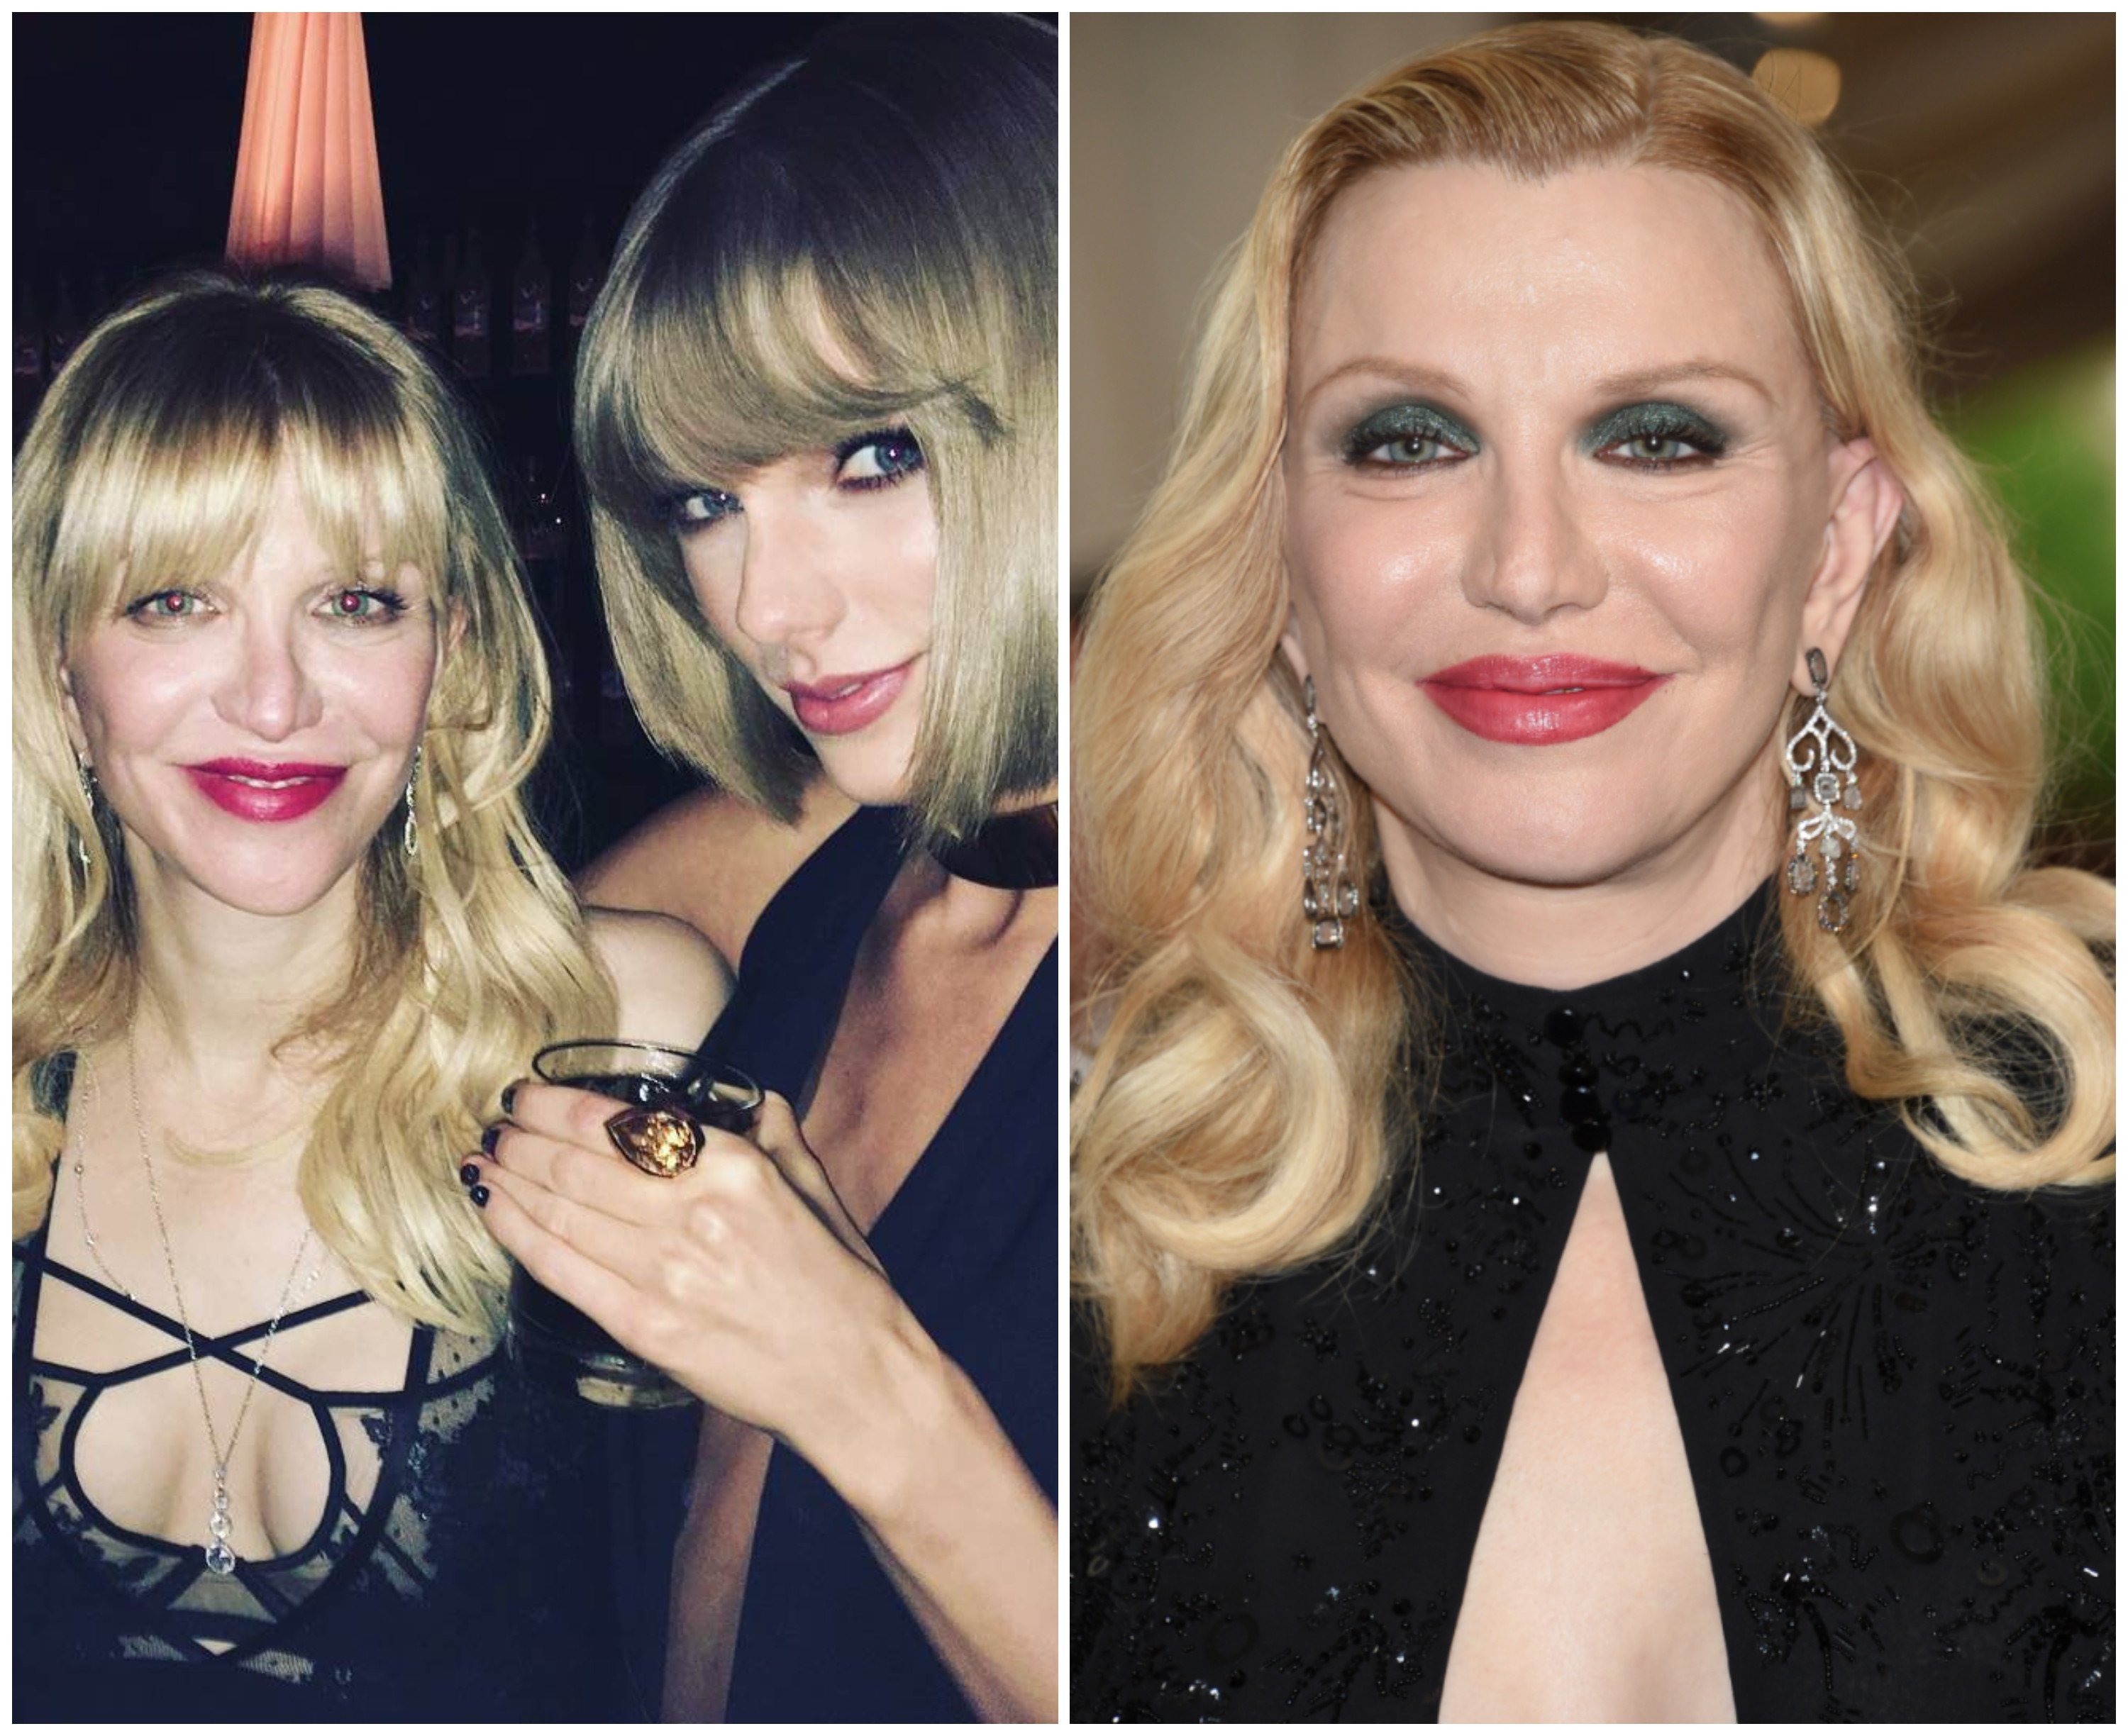 No-filter Courtney Love has criticised Taylor Swift, Beyoncé, Madonna and Lana Del Rey – but what did she say about Britney Spears’ dad? Photos: Courtney Love/Facebook, AP